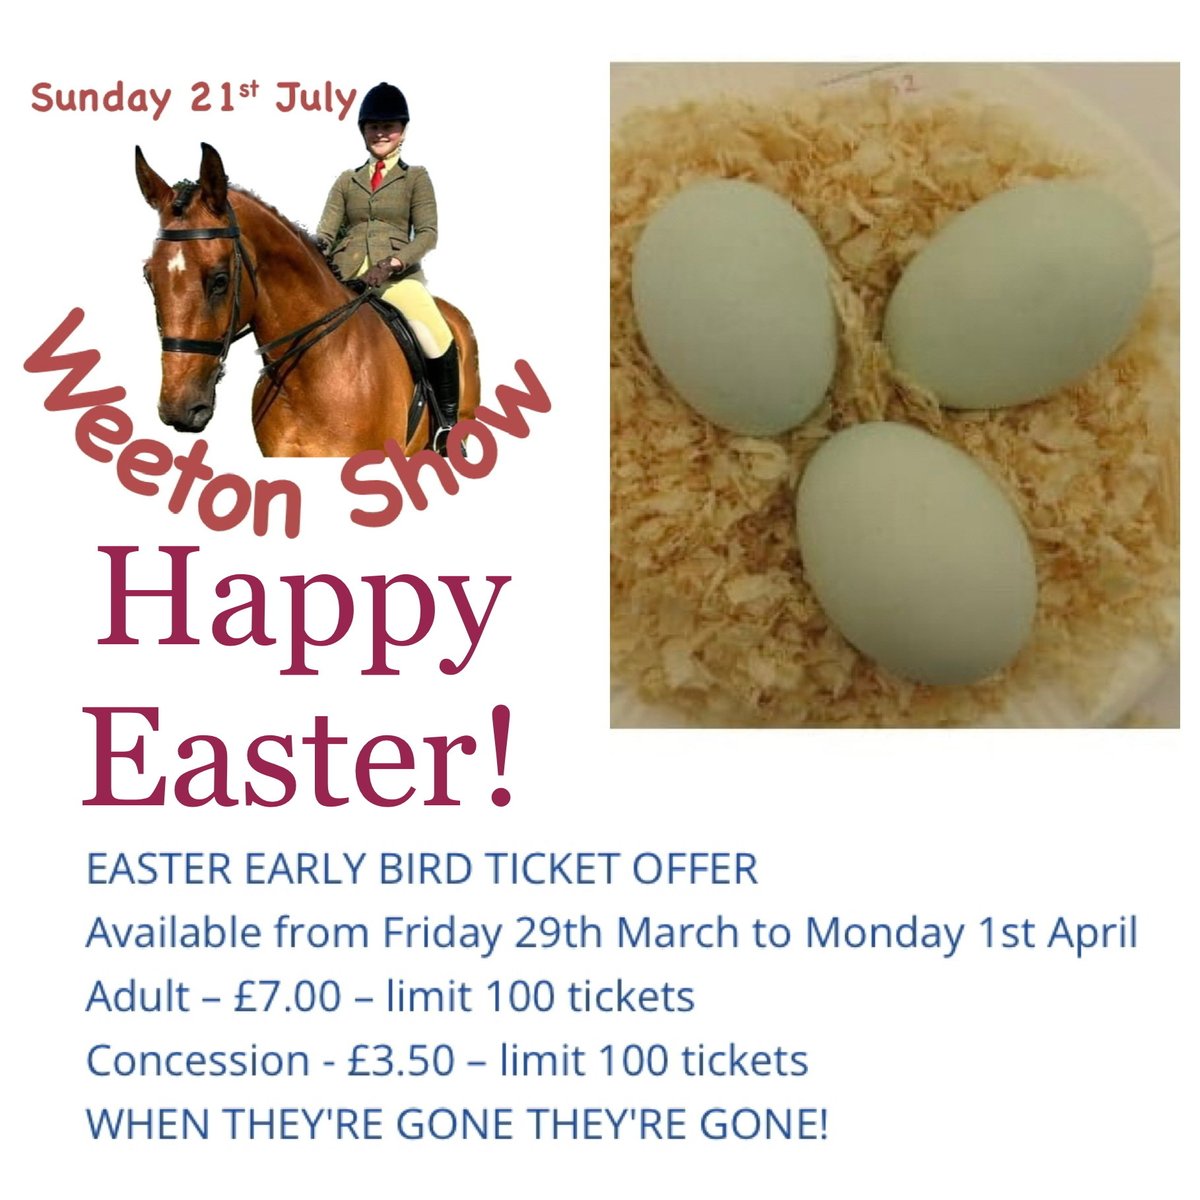 Don’t miss out on our special Easter Early Bird ticket offer ….. once they’re gone, they’re gone!